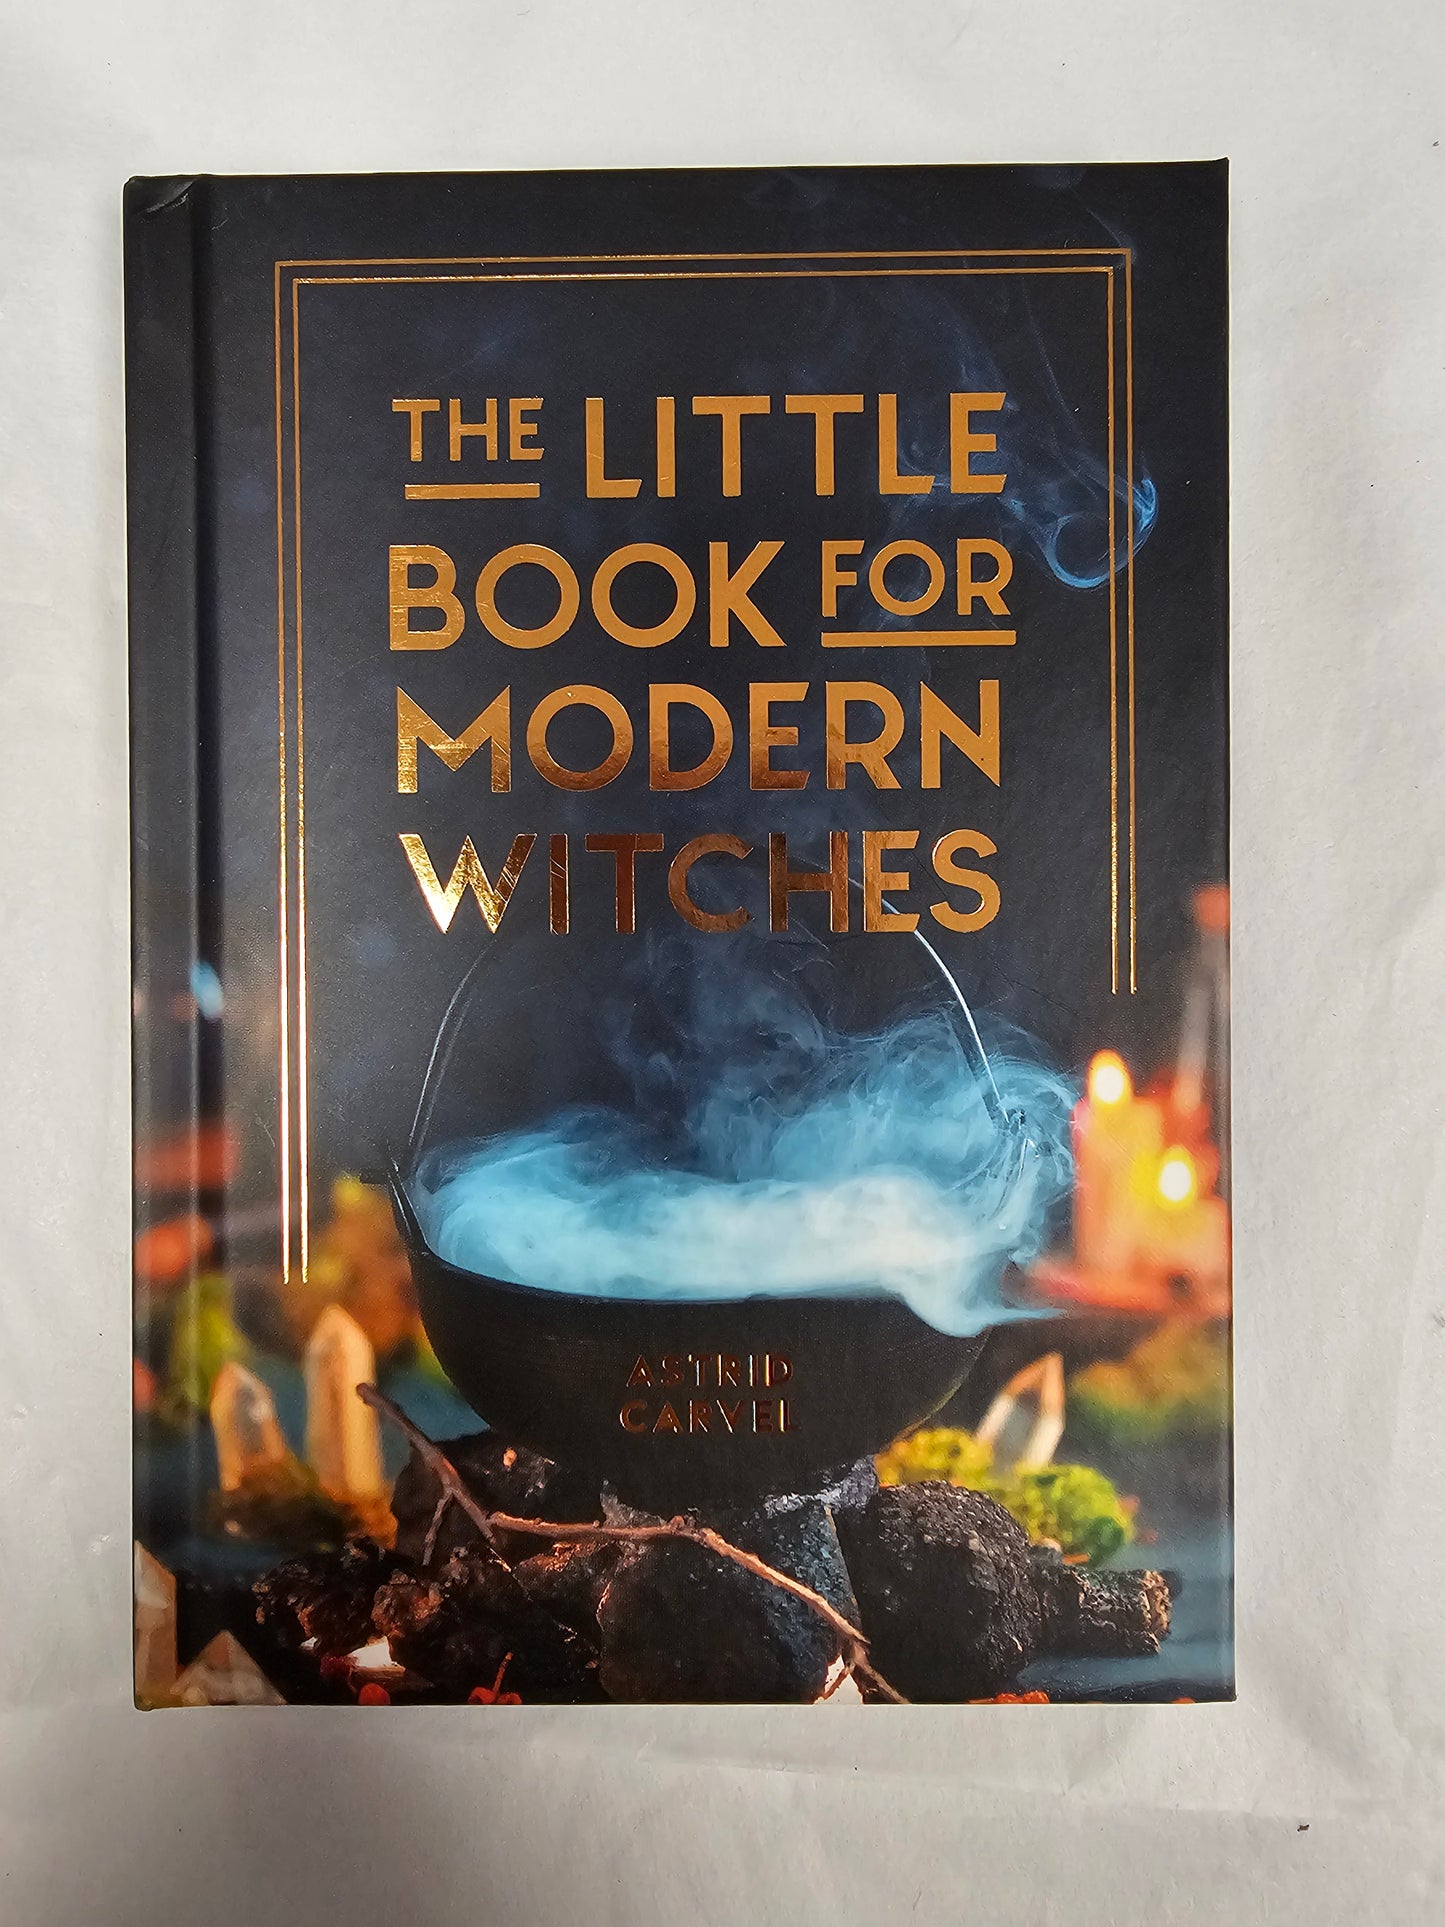 The little book for Modern Witches